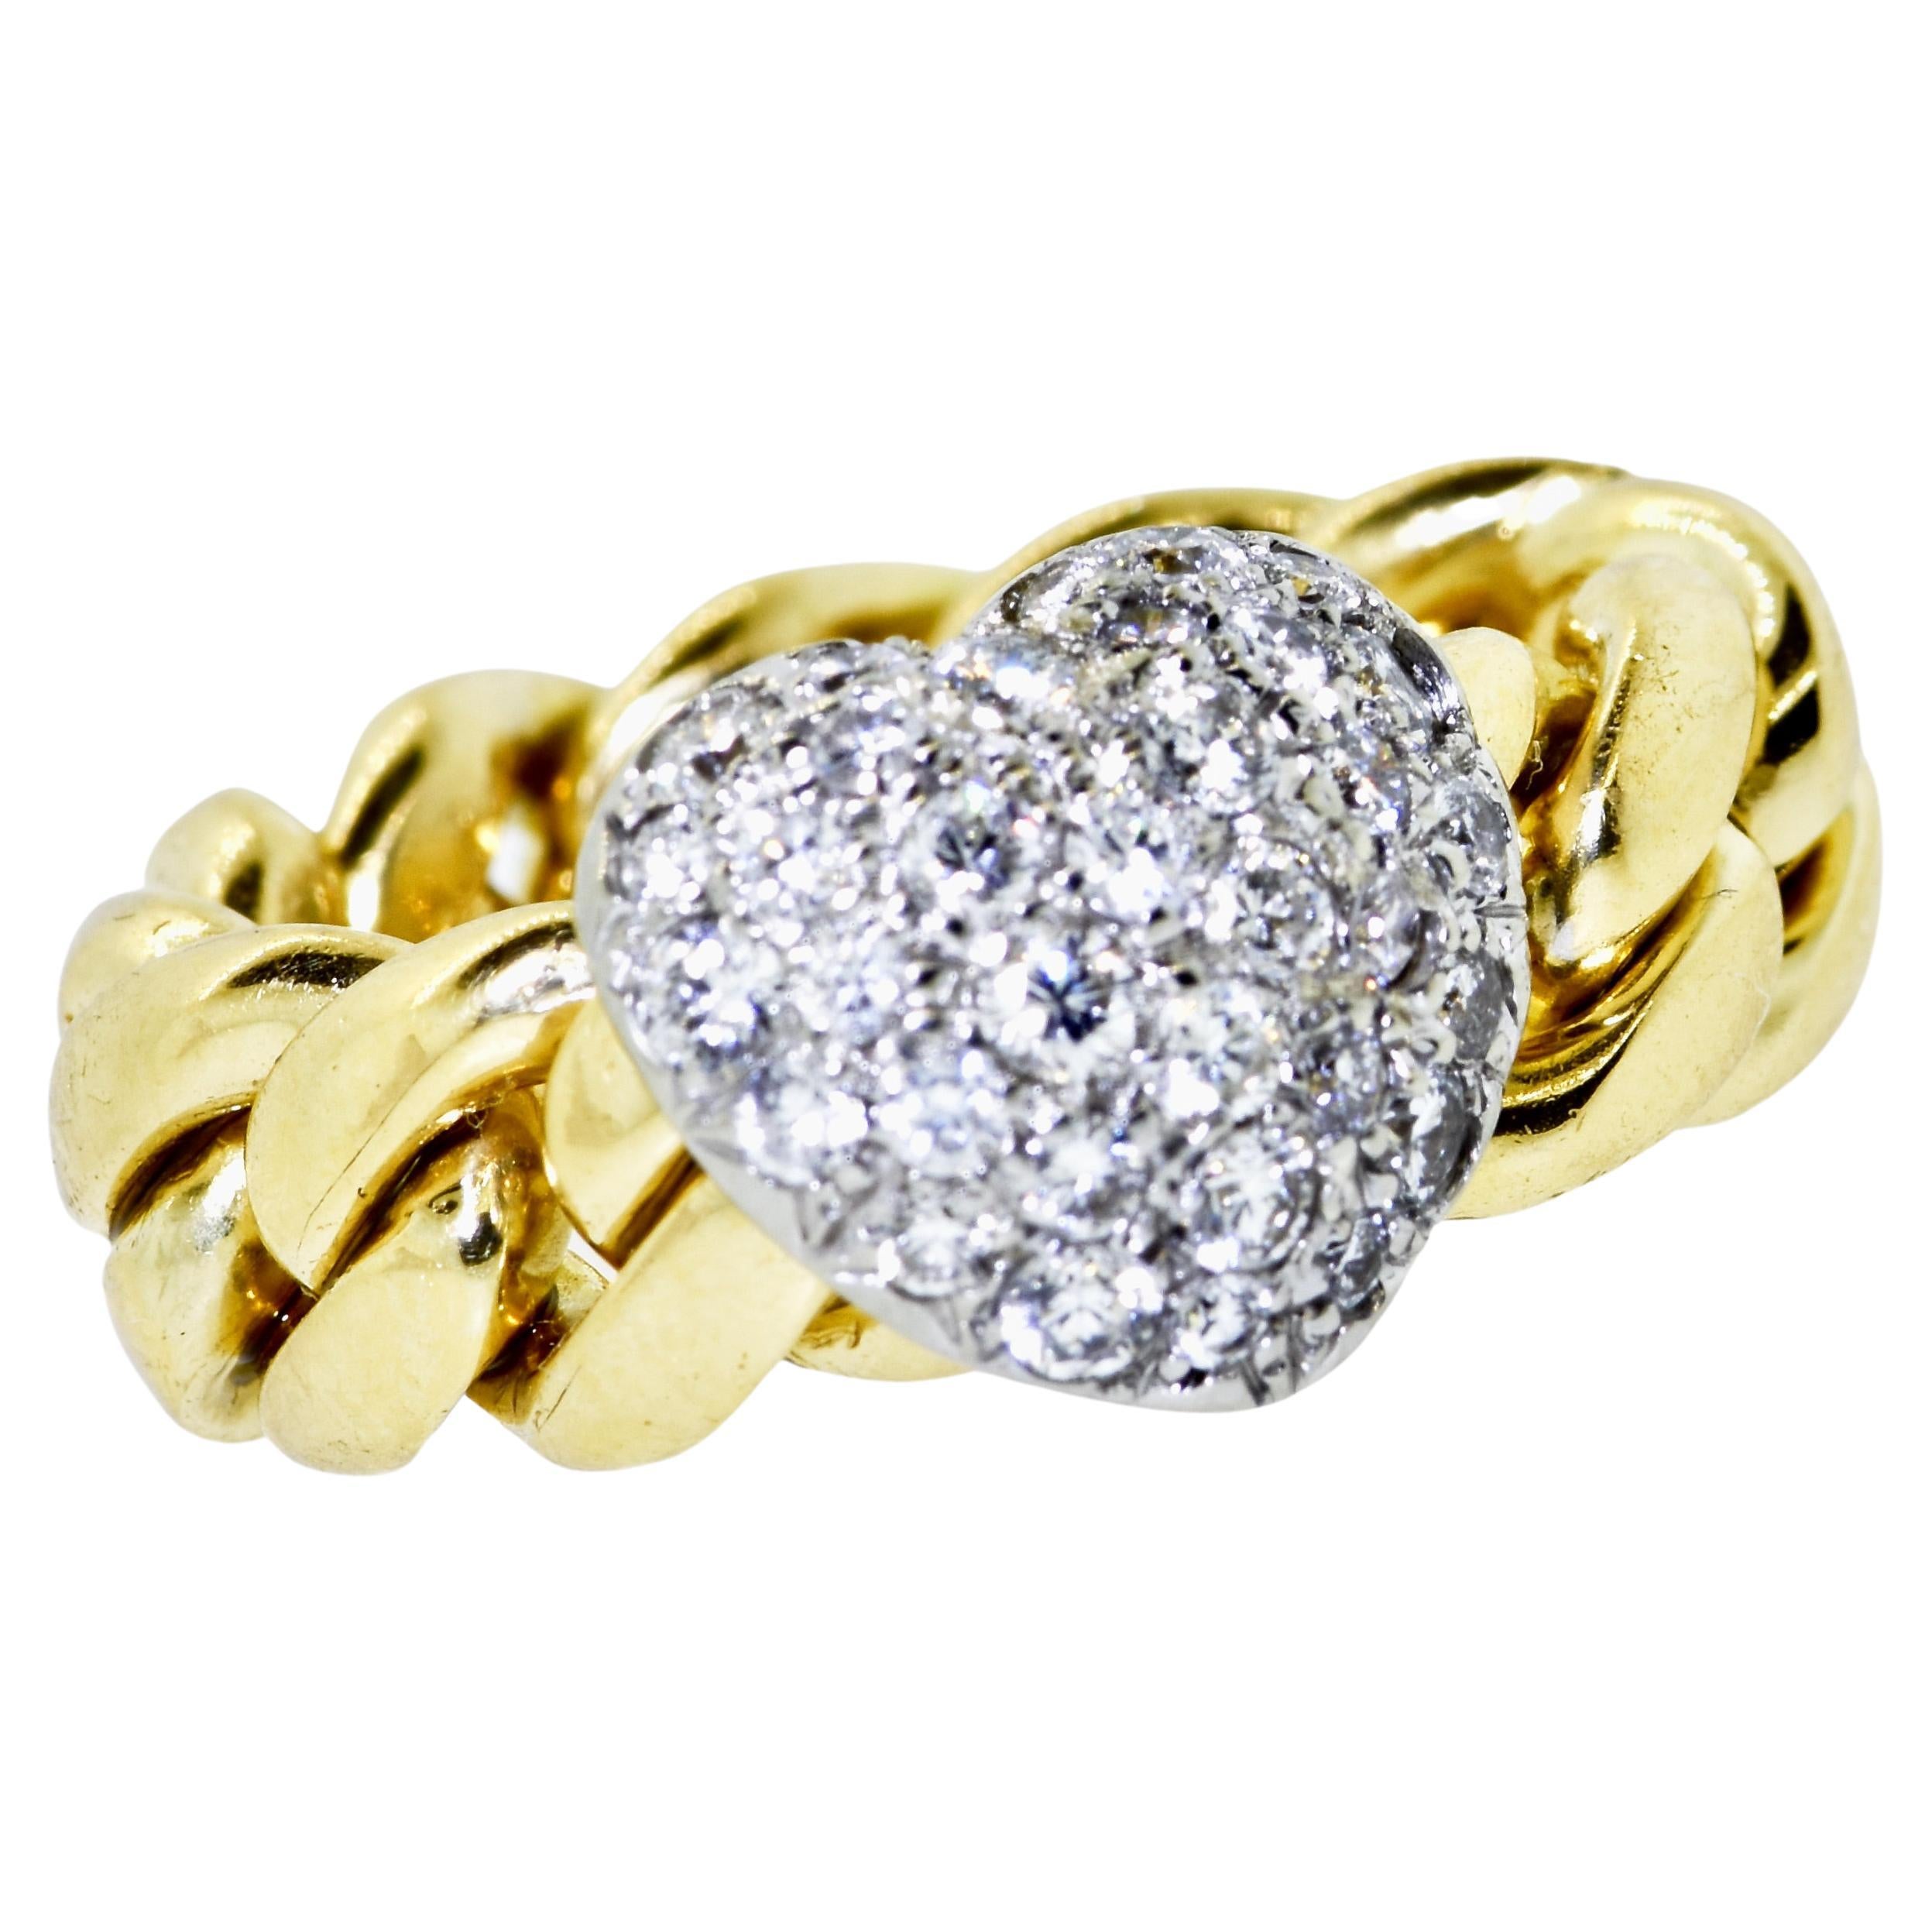 Platinum and 18K yellow gold heart motif unusual ring.  The platinum and diamond pave heart slides along the flexible 18K gold link.  The diamonds are quite nice. Brilliant cut, all well matched and finely cut.  The diamonds are all near colorless H